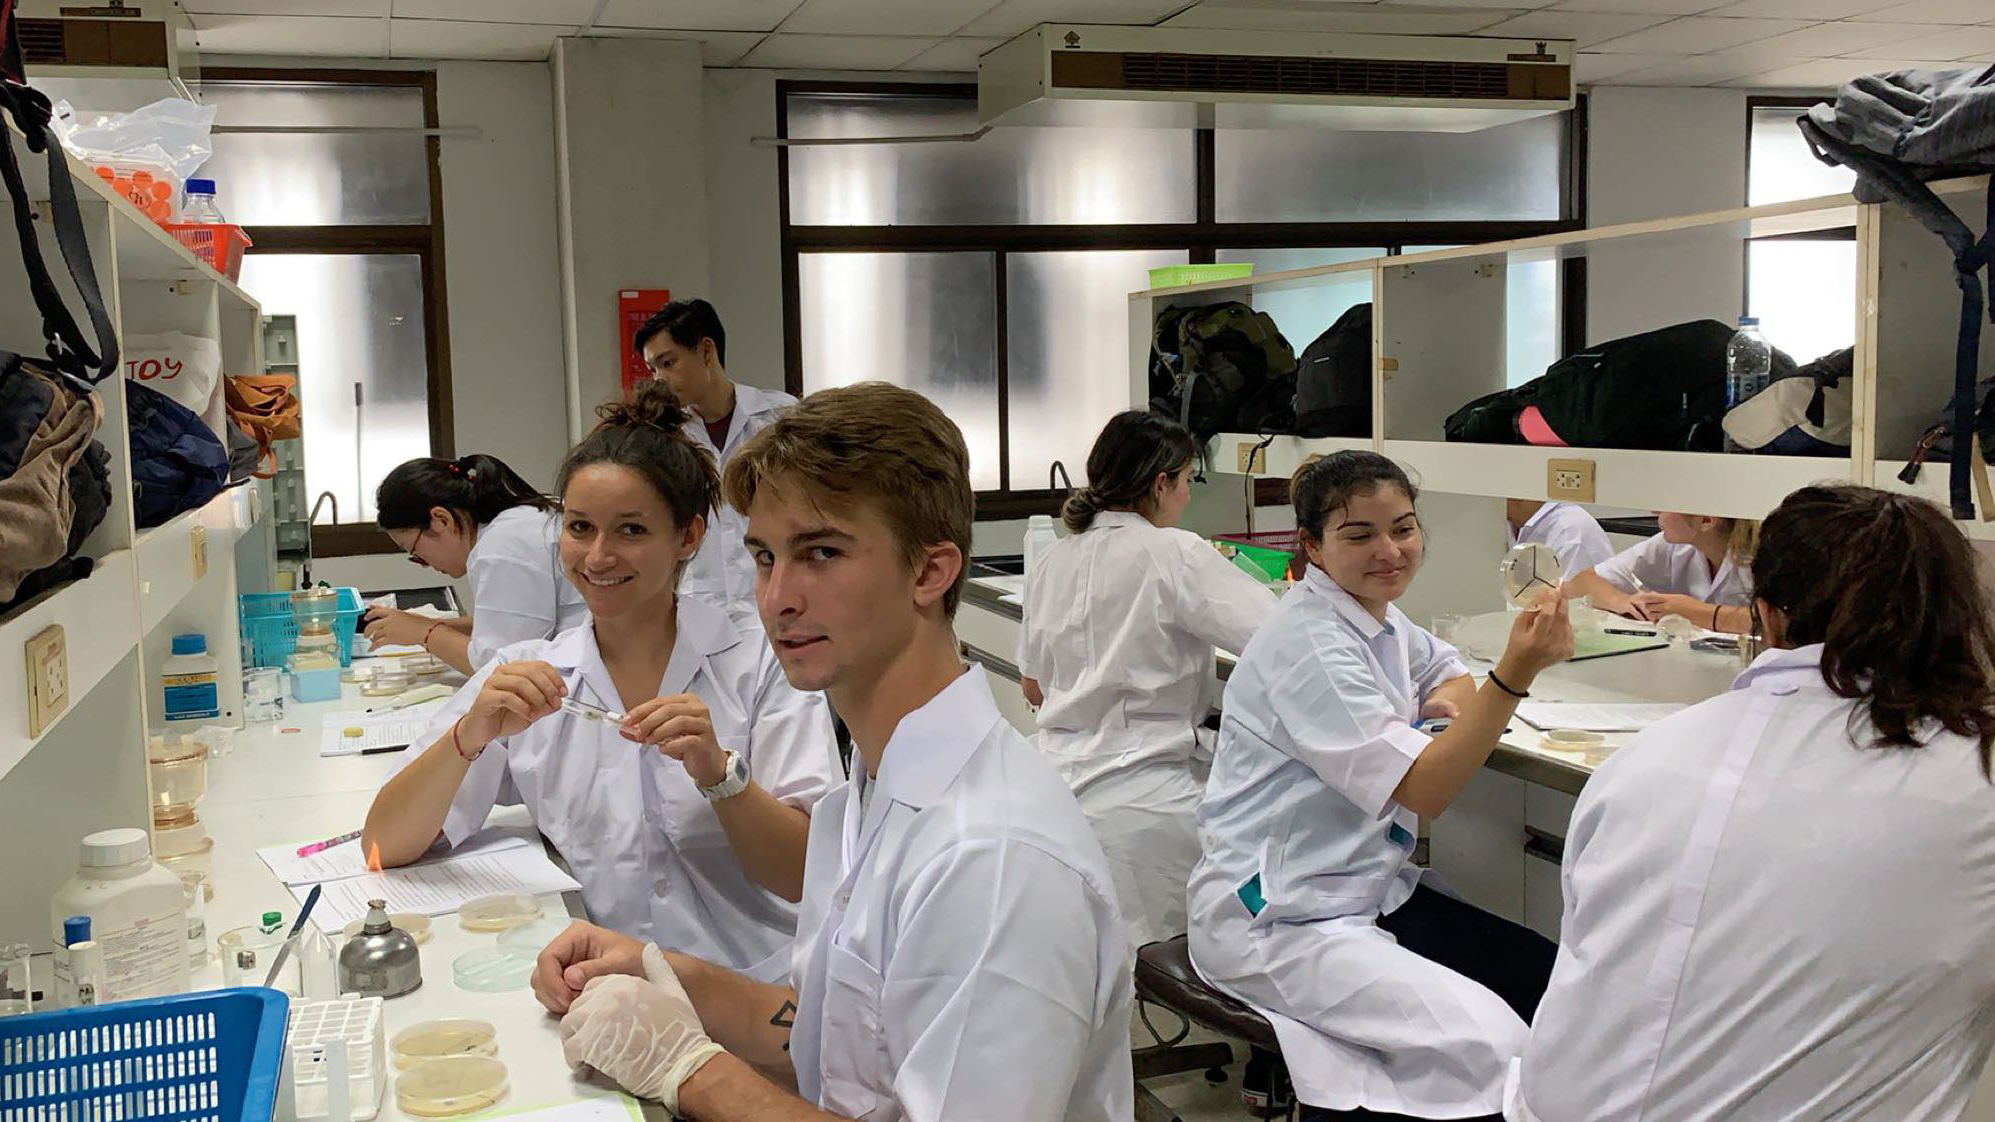 Students hard at work in a microbiology lab